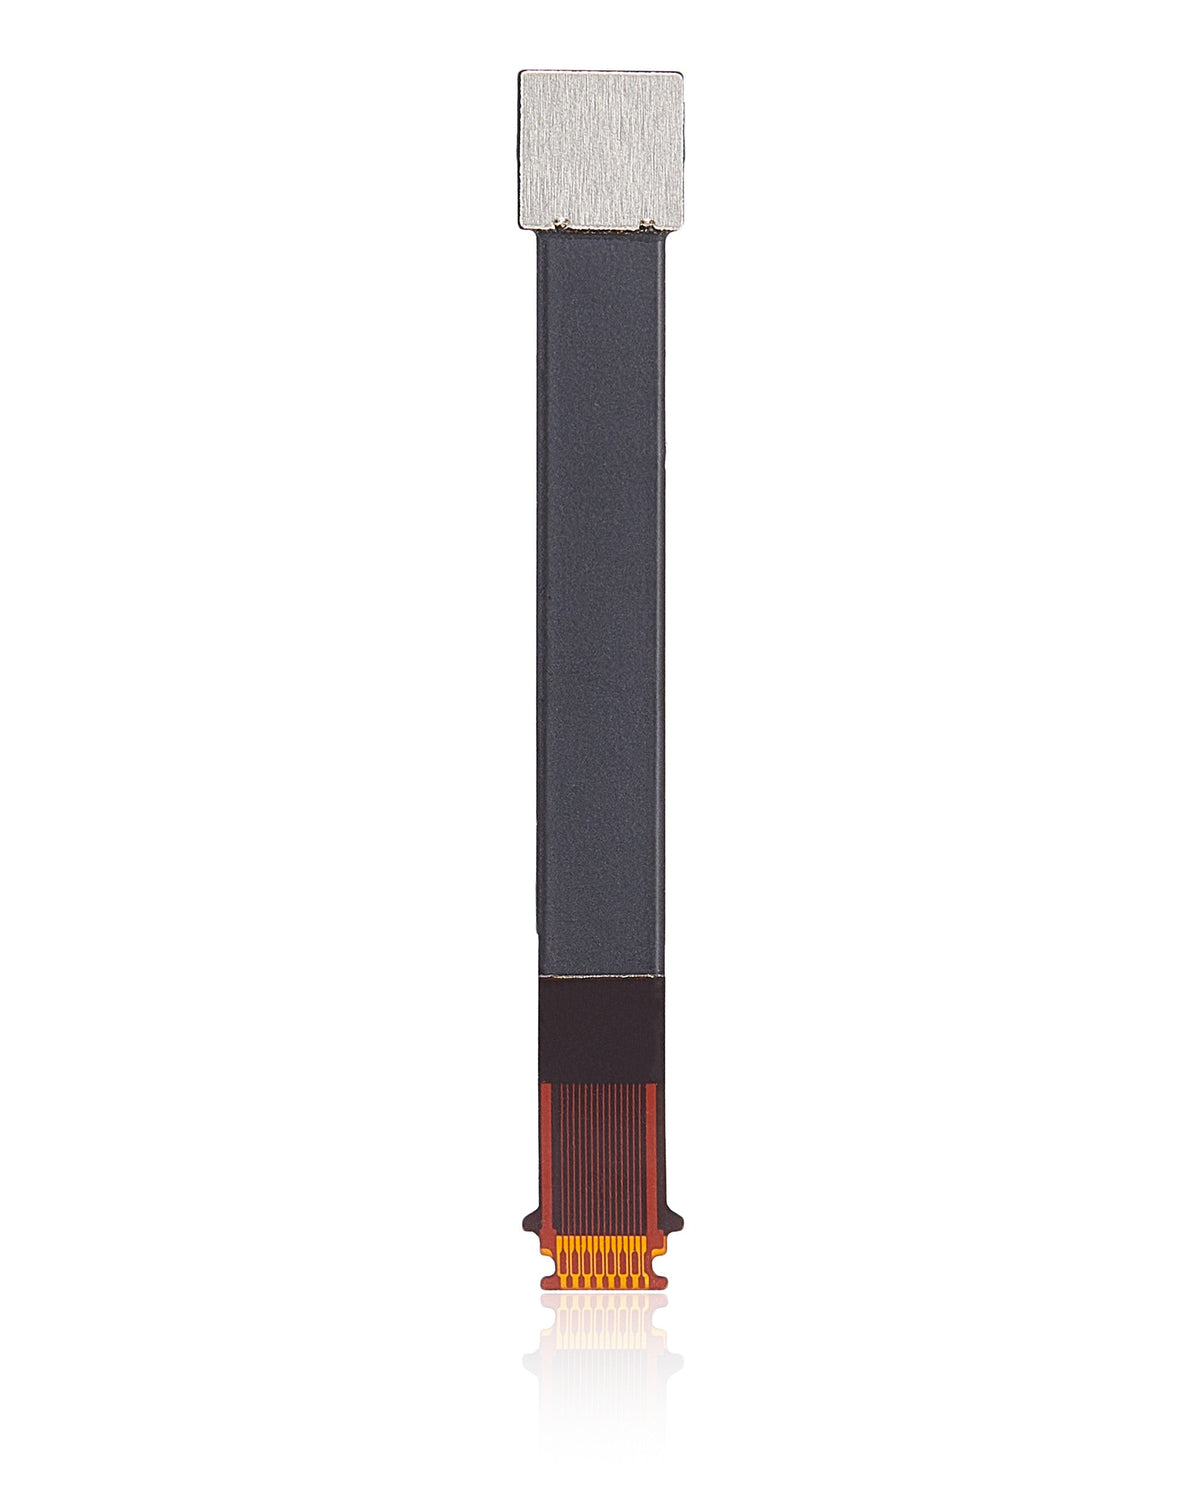 TESTER CABLE (DIGITIZER) COMPATIBLE FOR WATCH SERIES 2 / 3 (38MM / 42MM) / WATCH SERIES 4 (40MM / 44MM)